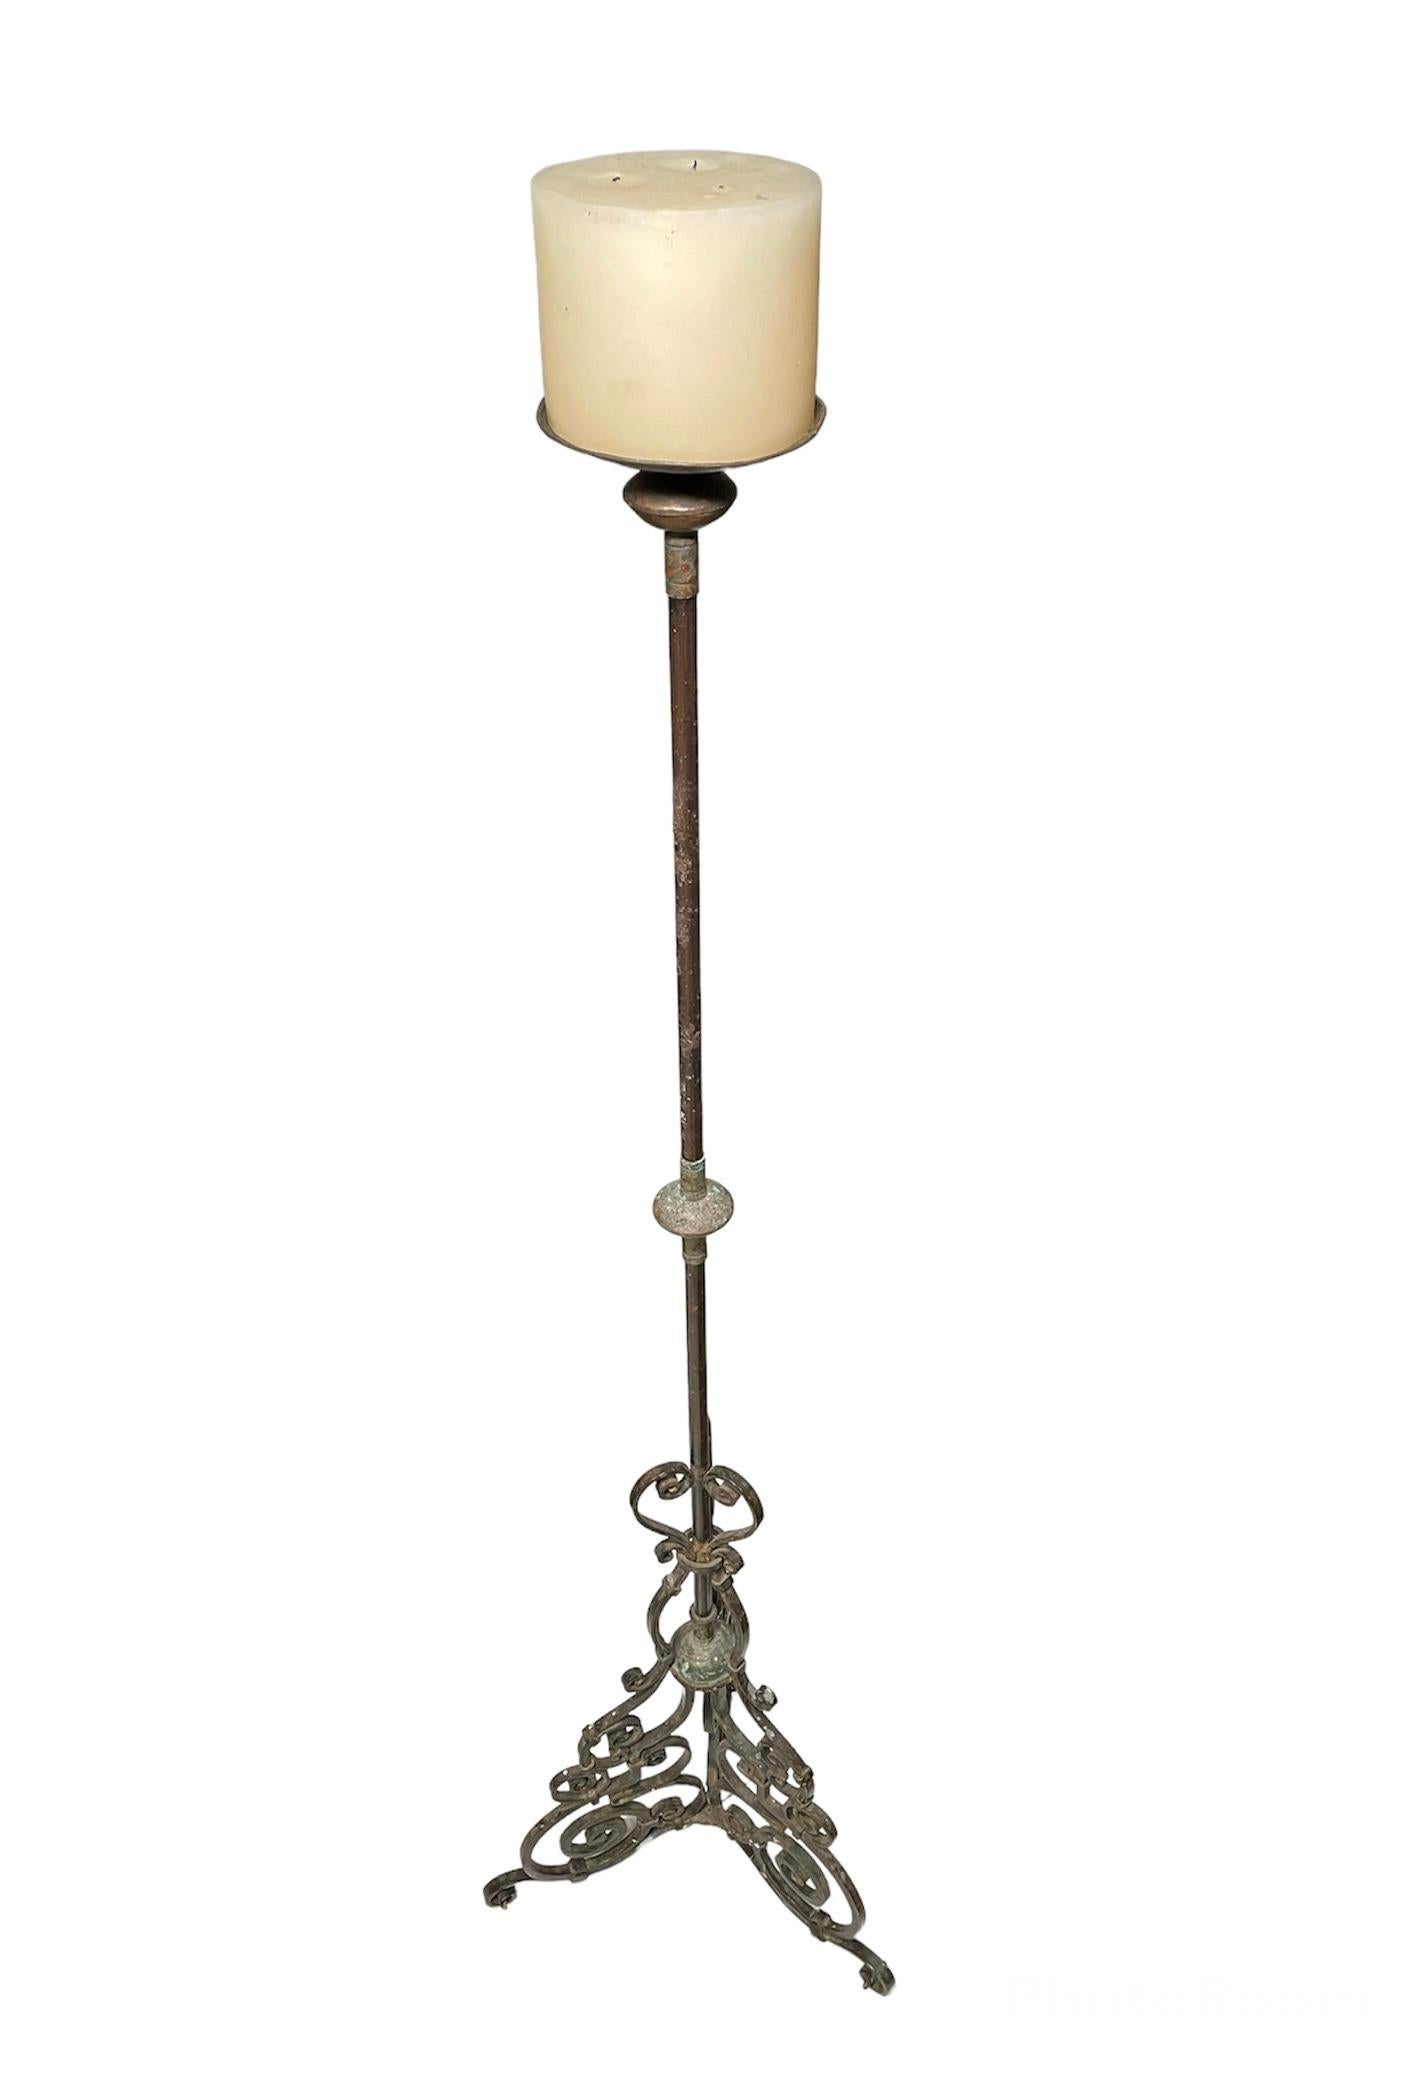 This is a tall wrought iron candle holder/torchere that ends in a tripod base. Each leg of this base is adorned with large scrolls that start in the center stand forming a heart and finish in each leg. One wide round candle sits over the candle pan.